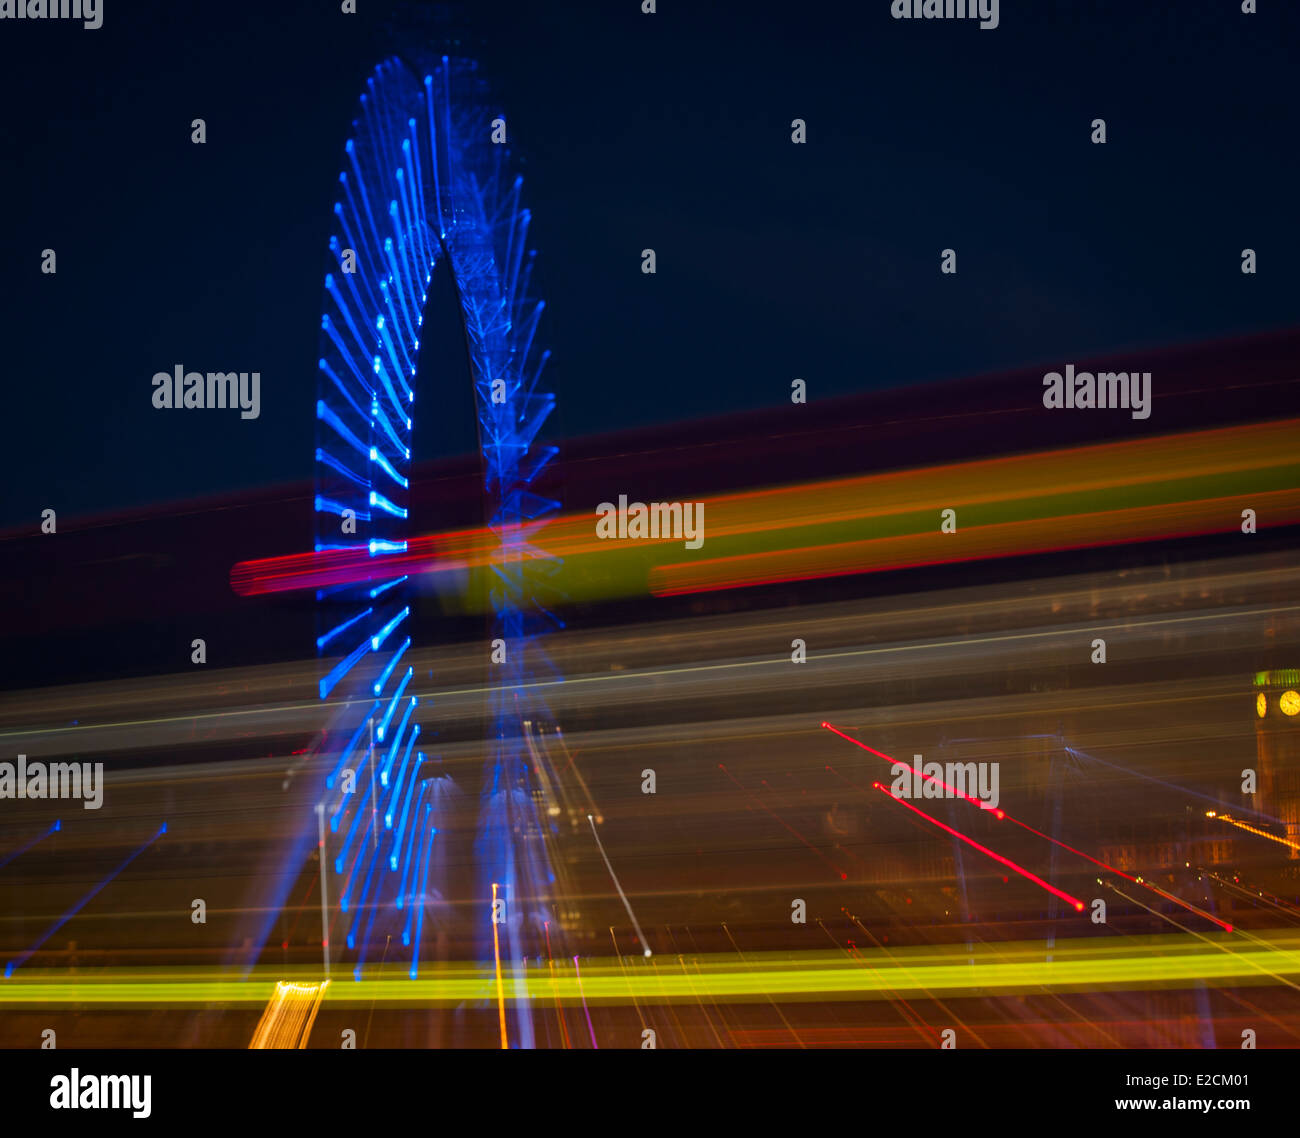 Central London Westminster London Eye , Millennium Wheel , bus lights , at night with zoom blur abstract art artistic movement Stock Photo